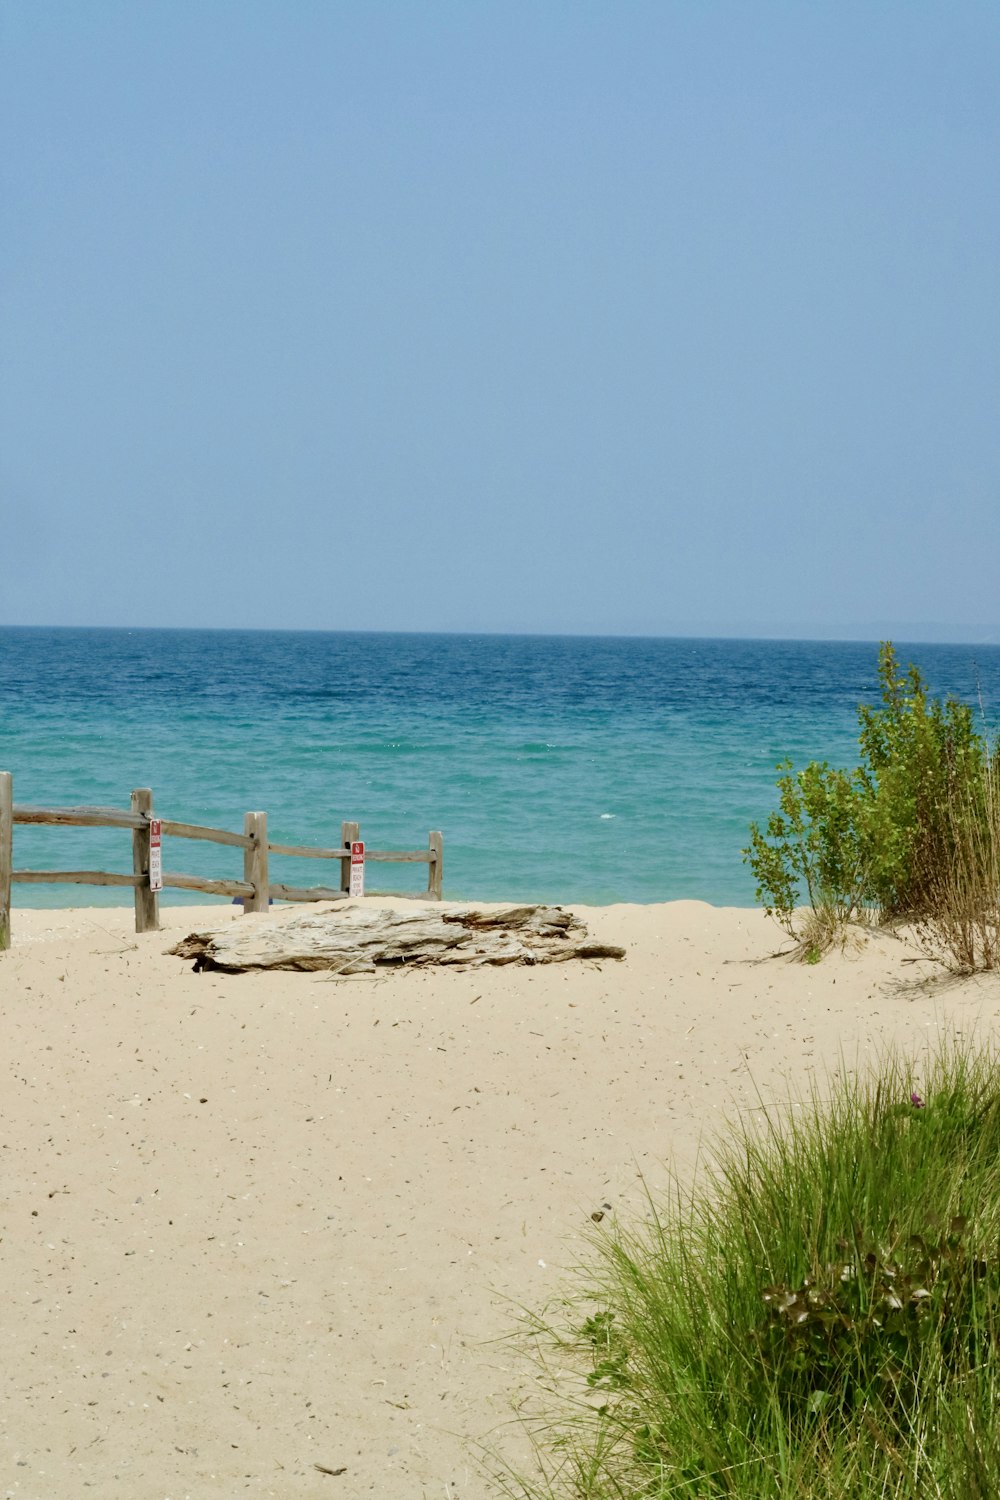 a sandy beach with a wooden fence and ocean in the background